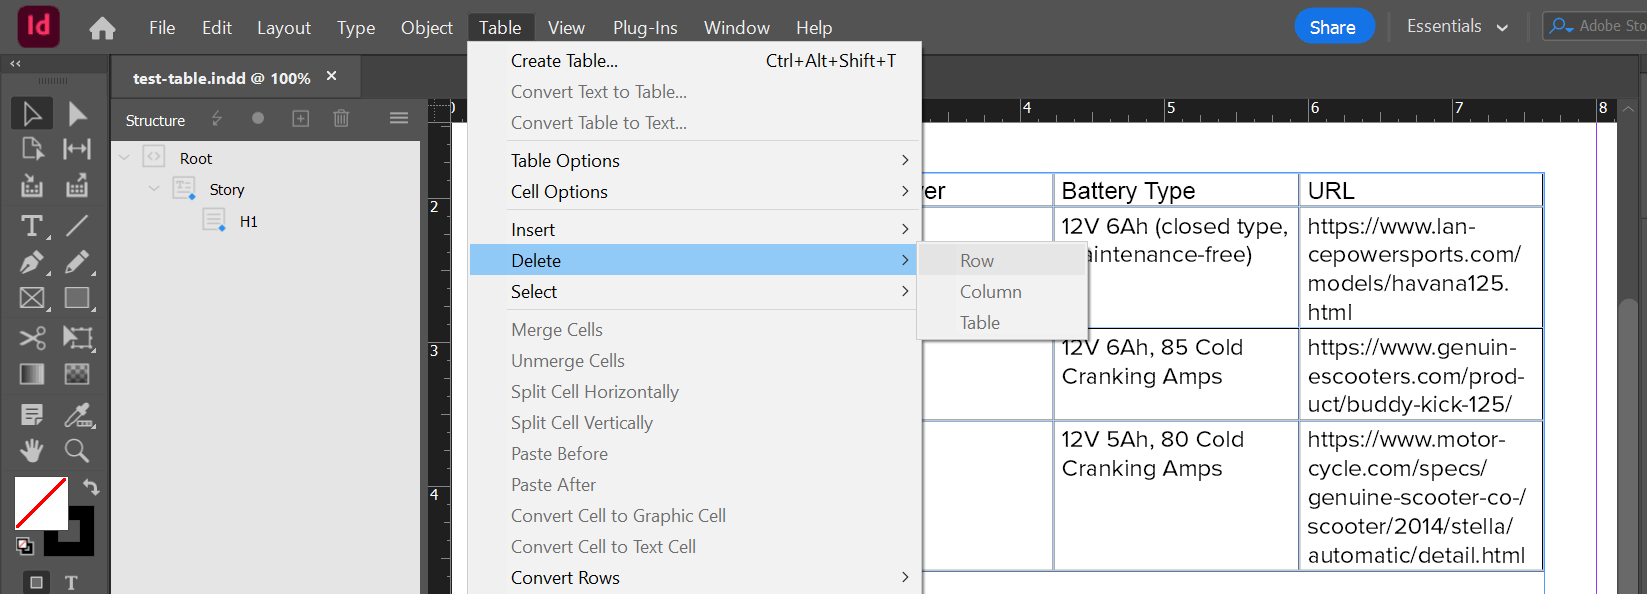 How to delete a row in a table